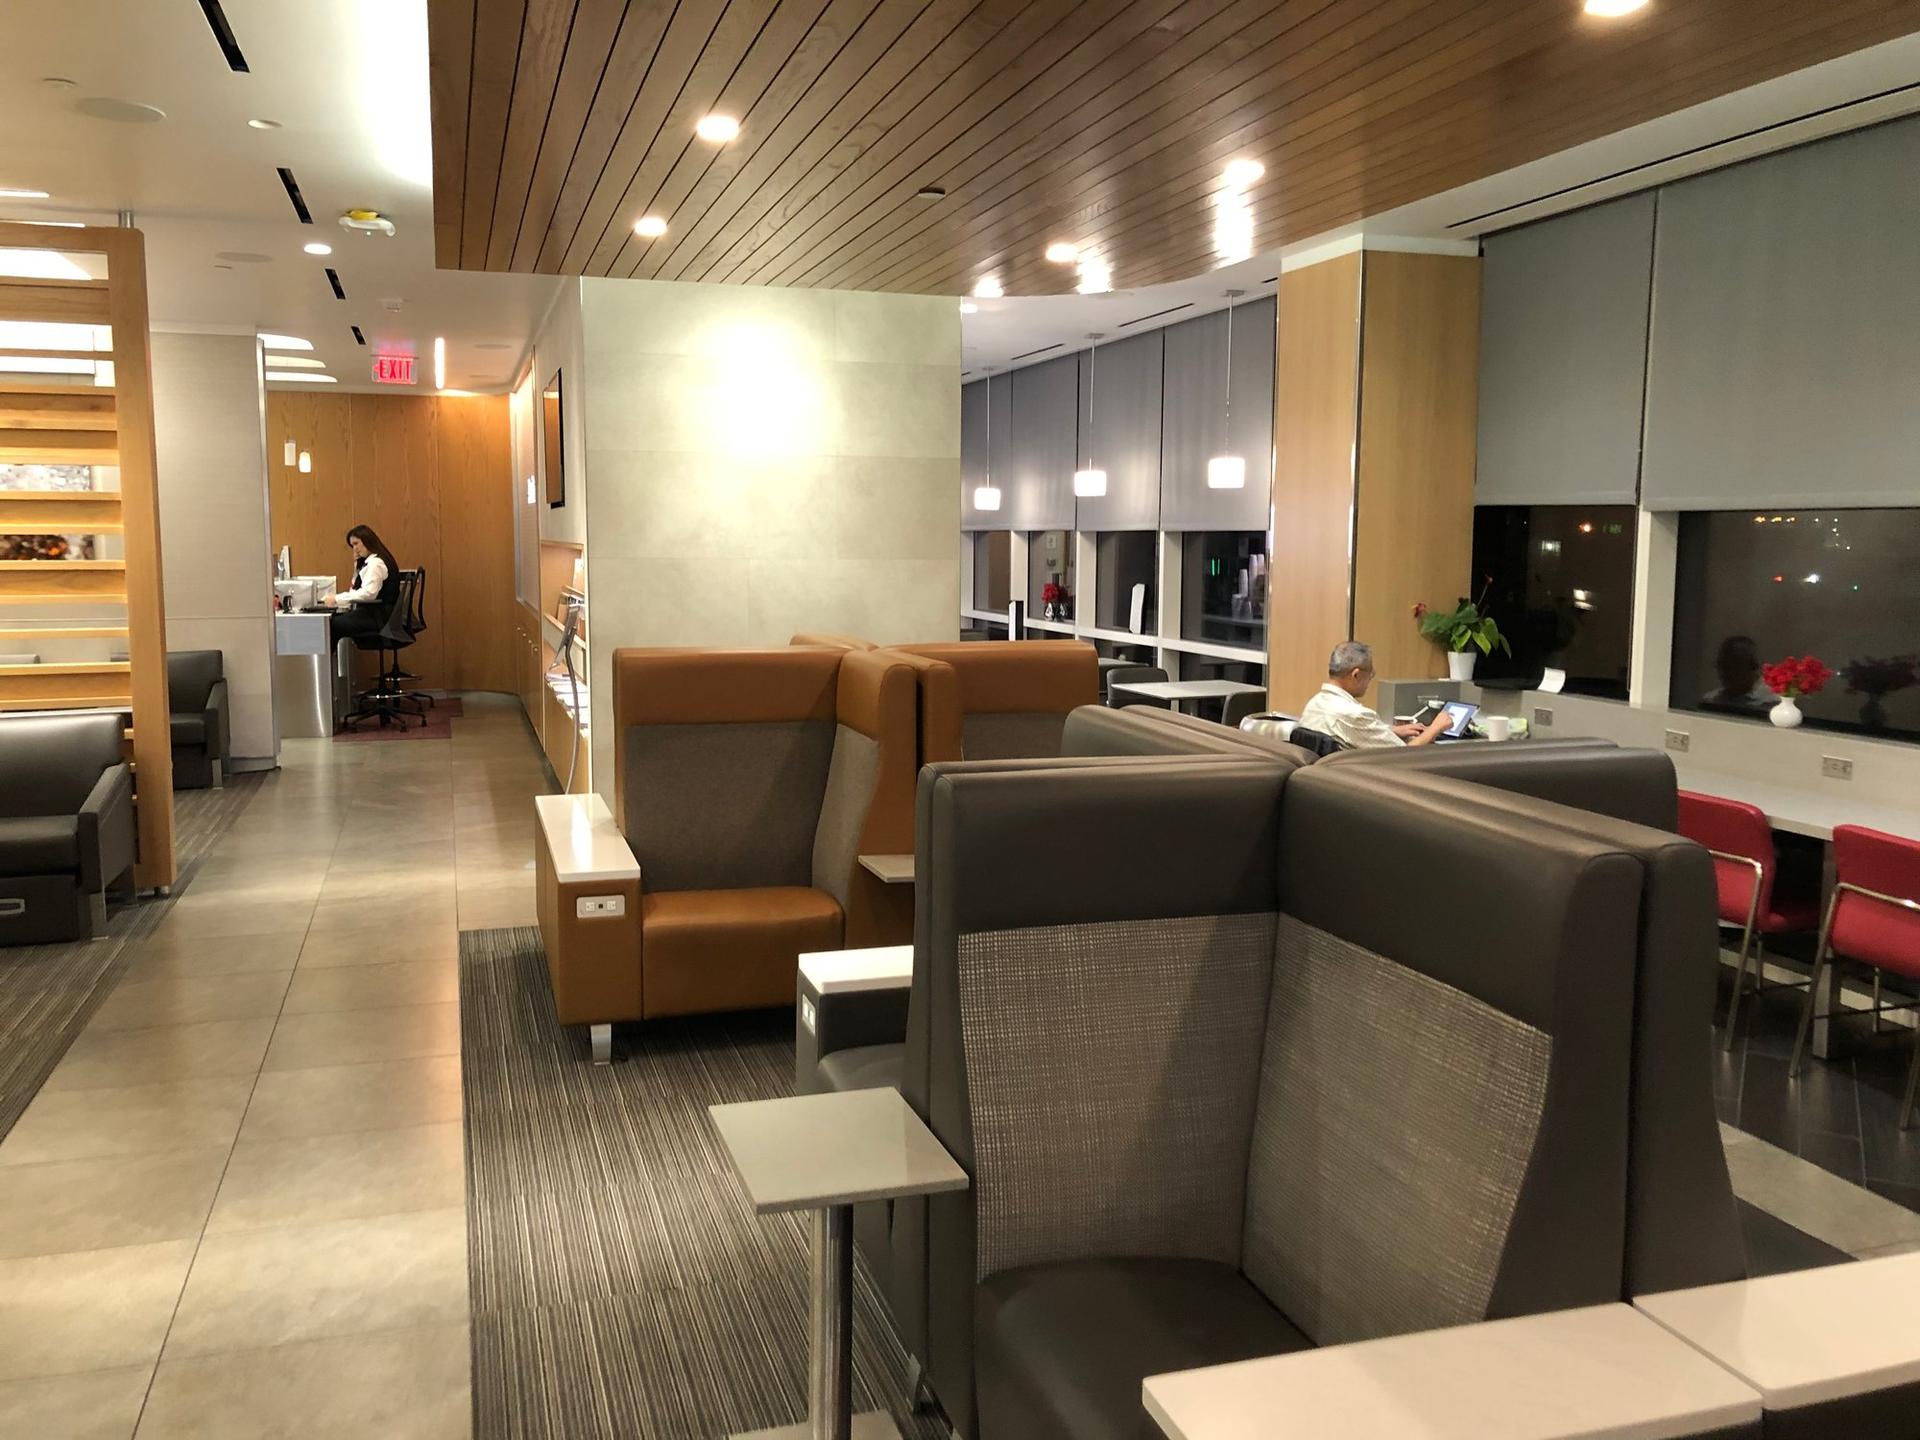 American Airlines Admirals Club image 9 of 13